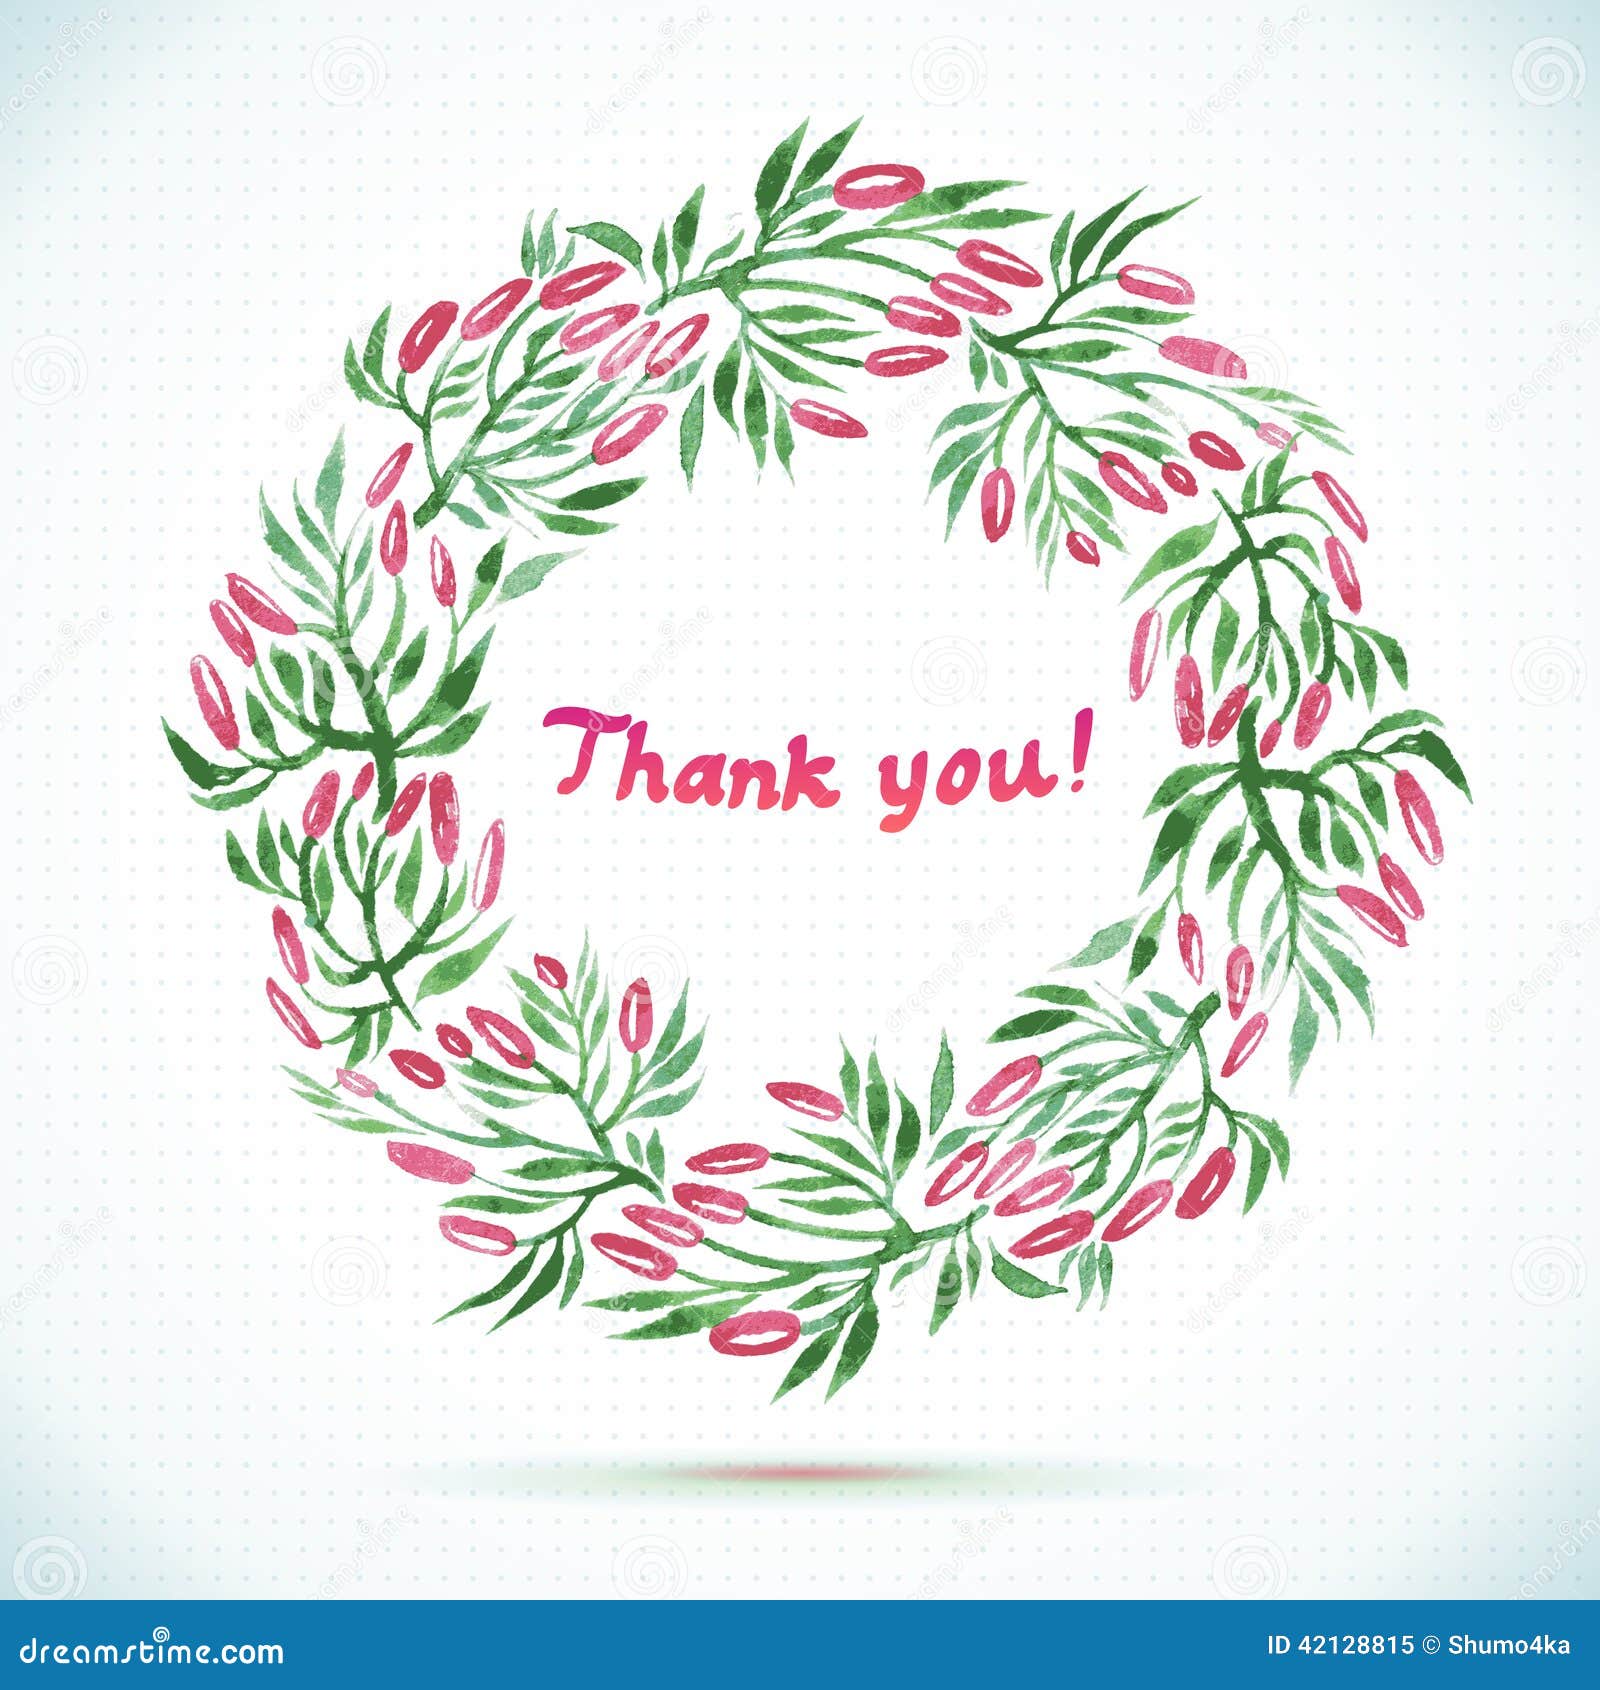 free clip art thank you flowers - photo #22